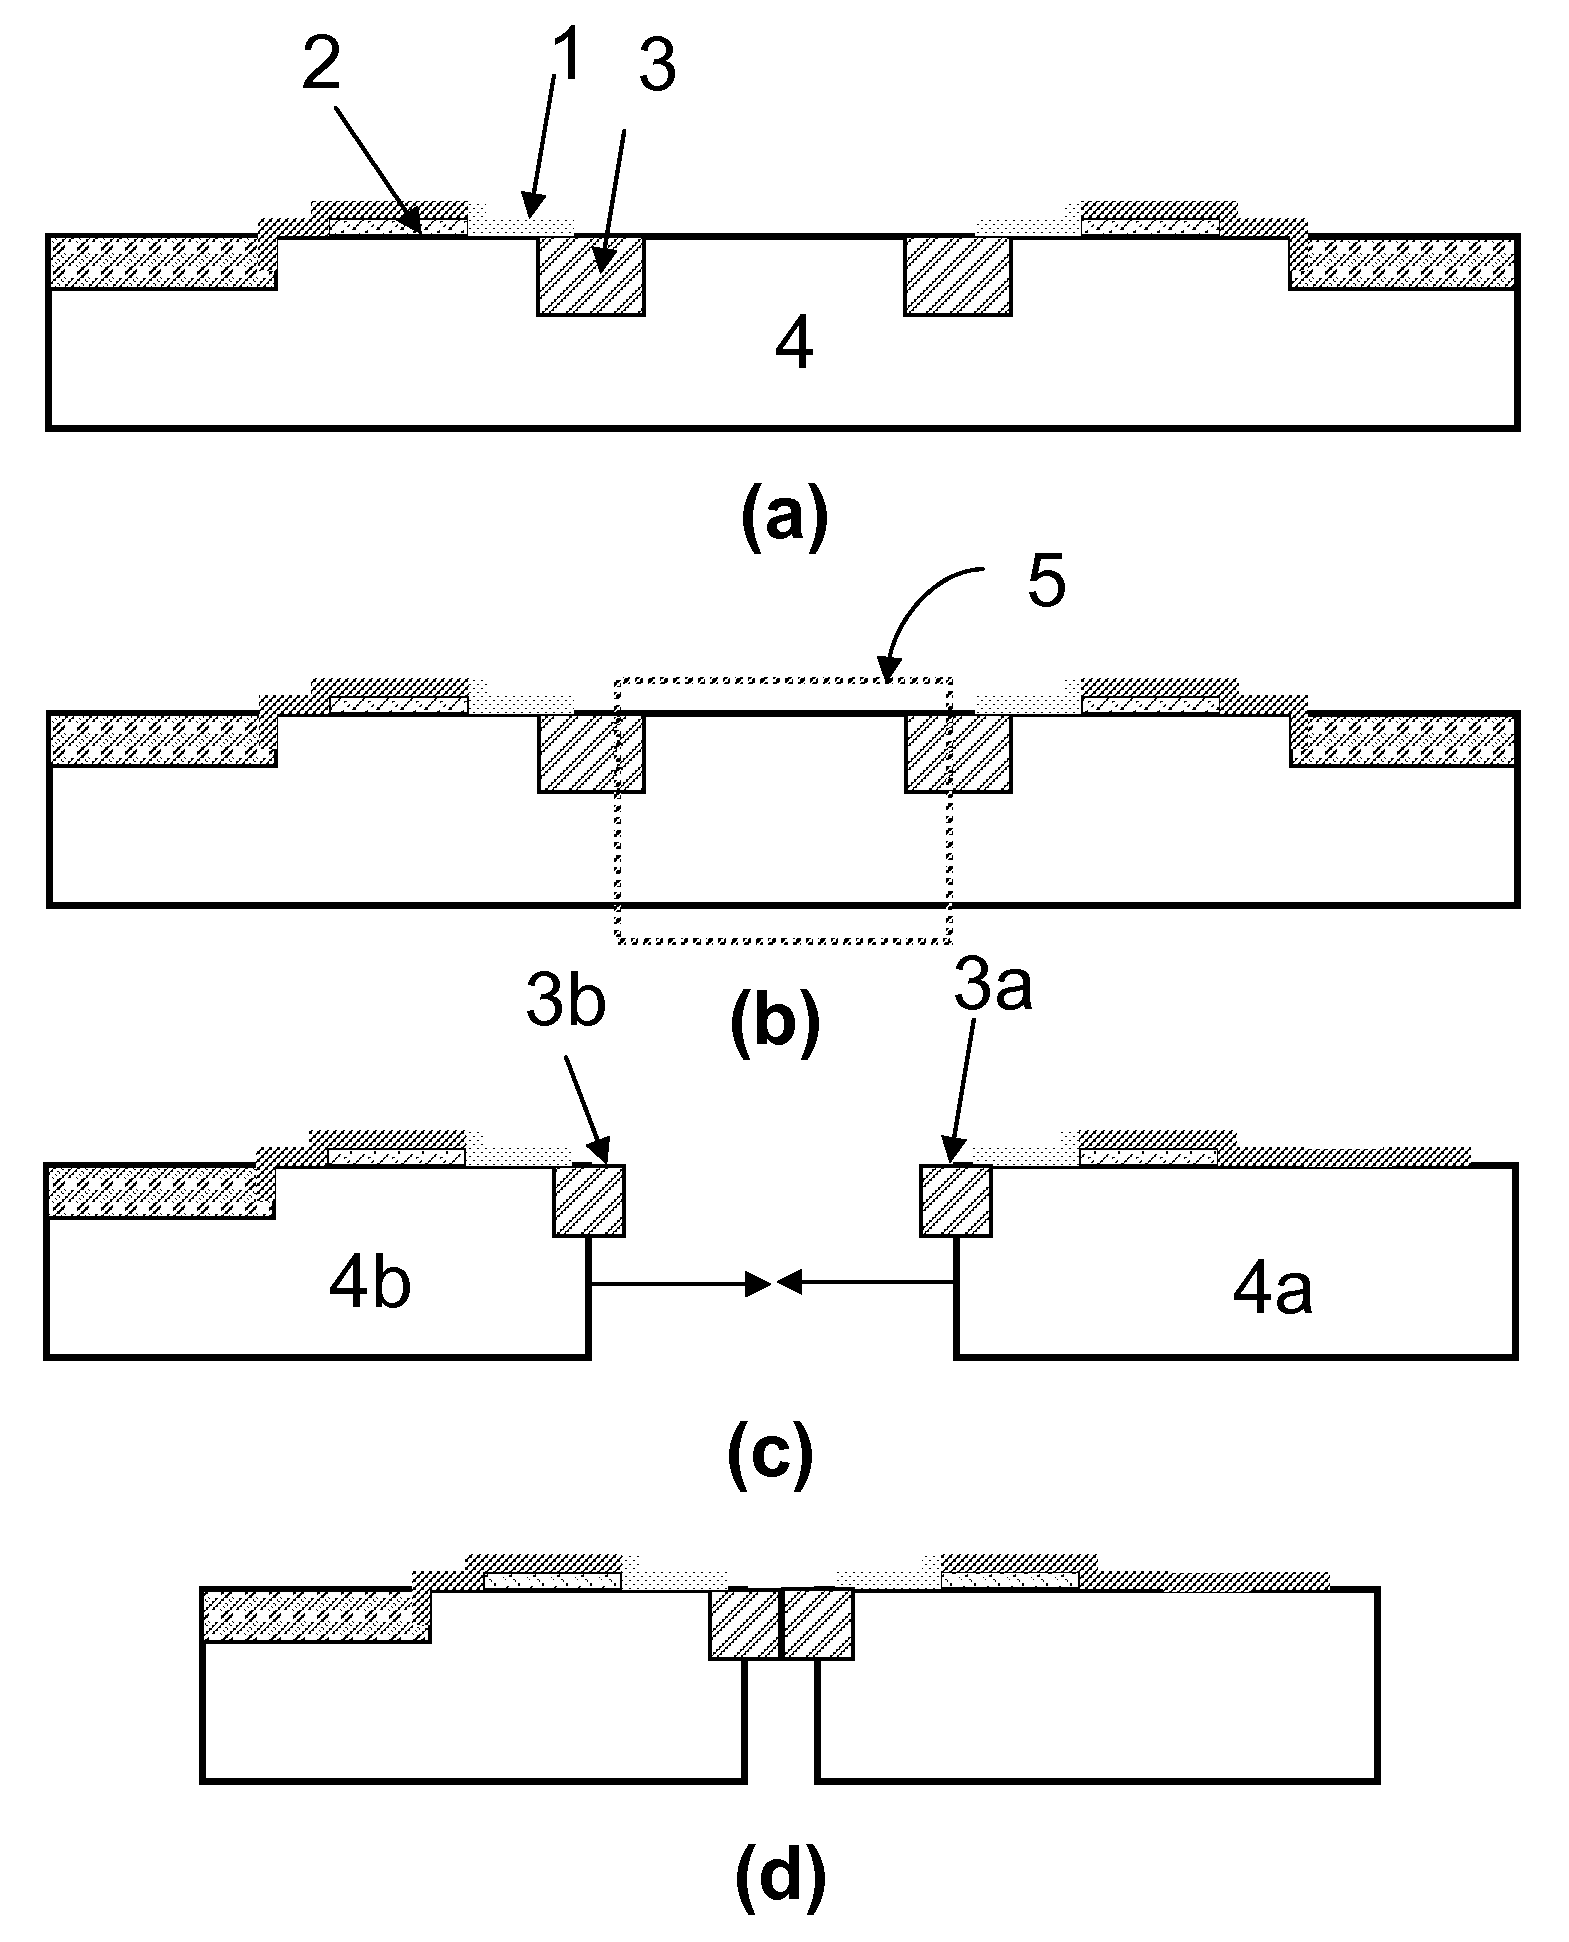 Direct edge connection for multi-chip integrated circuits